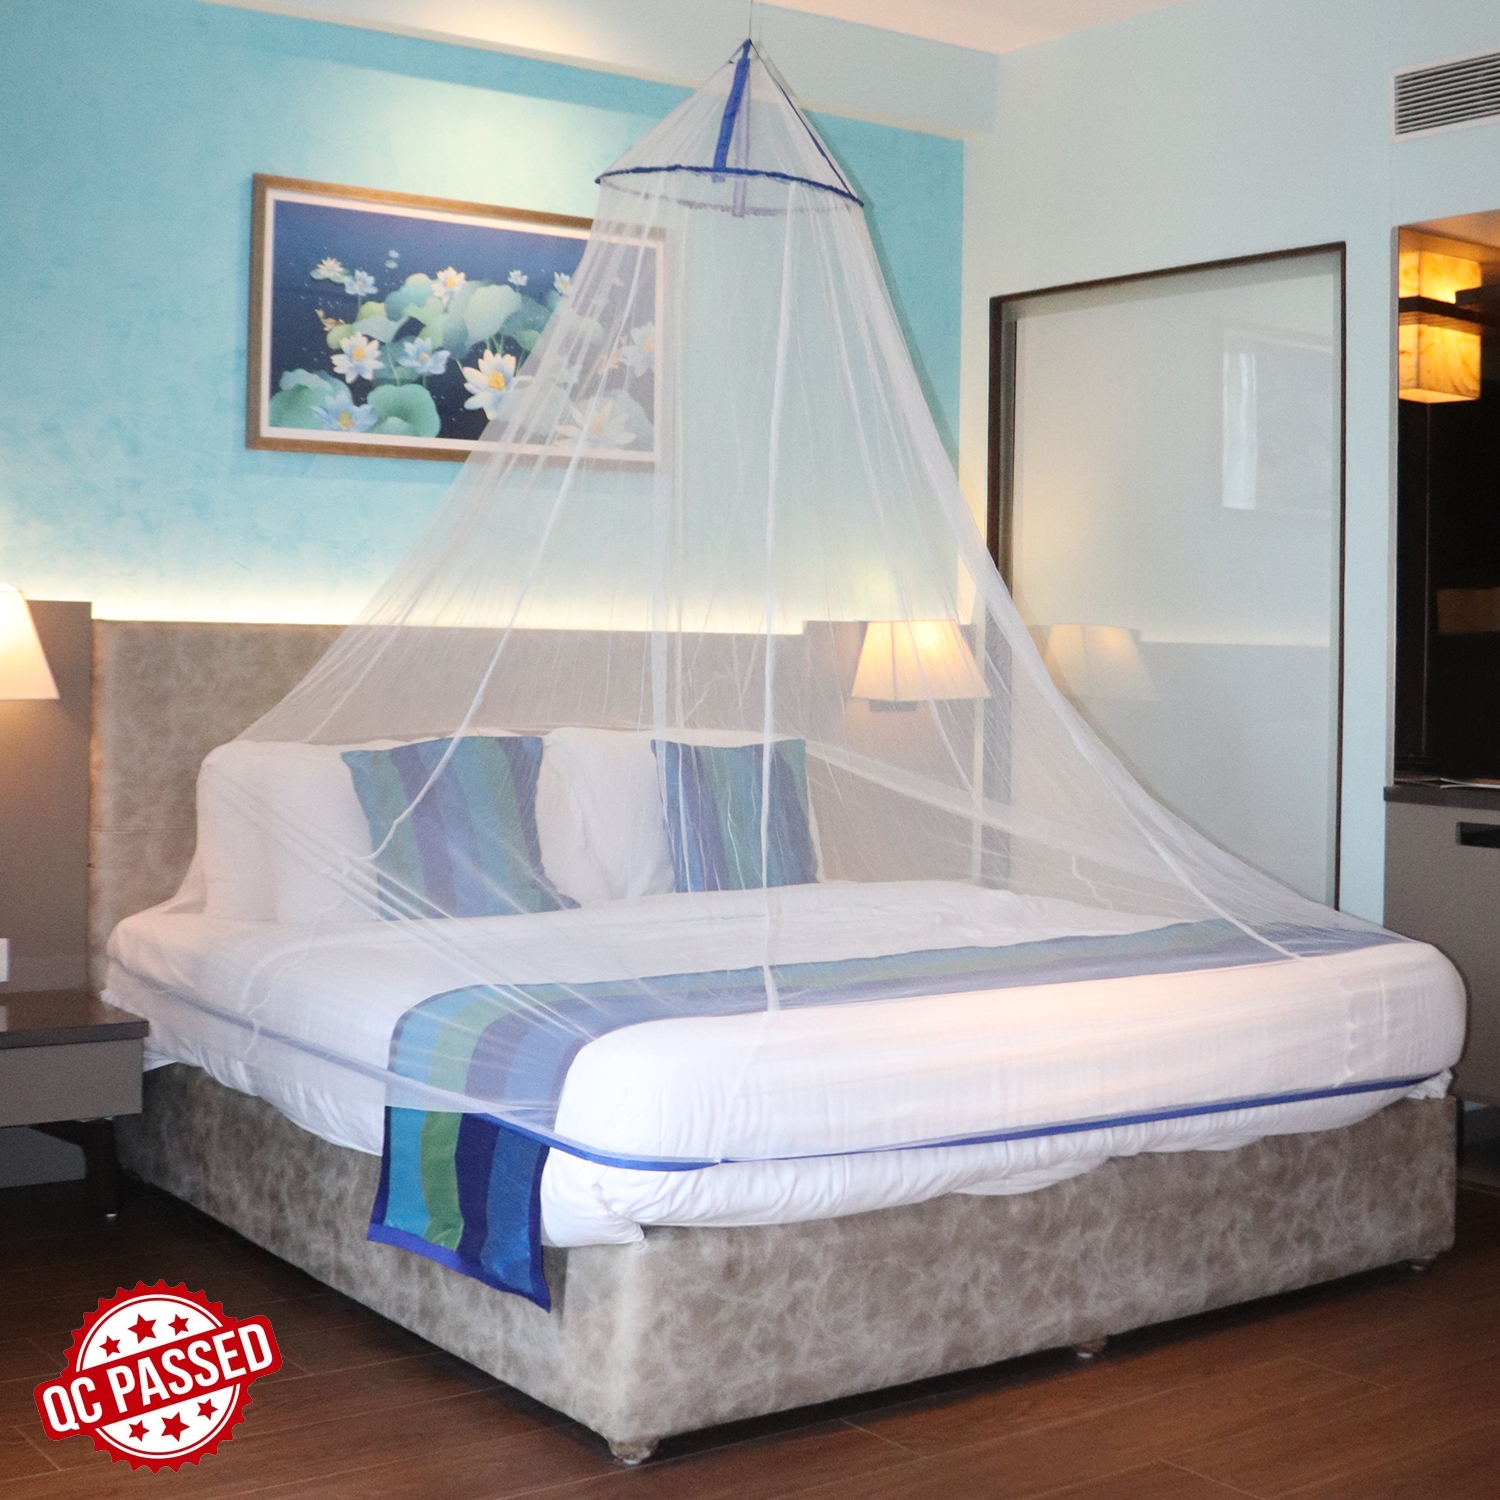 SILVER SHINE | Mosquito Net for Double Bed, King-Size, Round Ceiling Hanging Foldable Polyester Net White And Blue 0